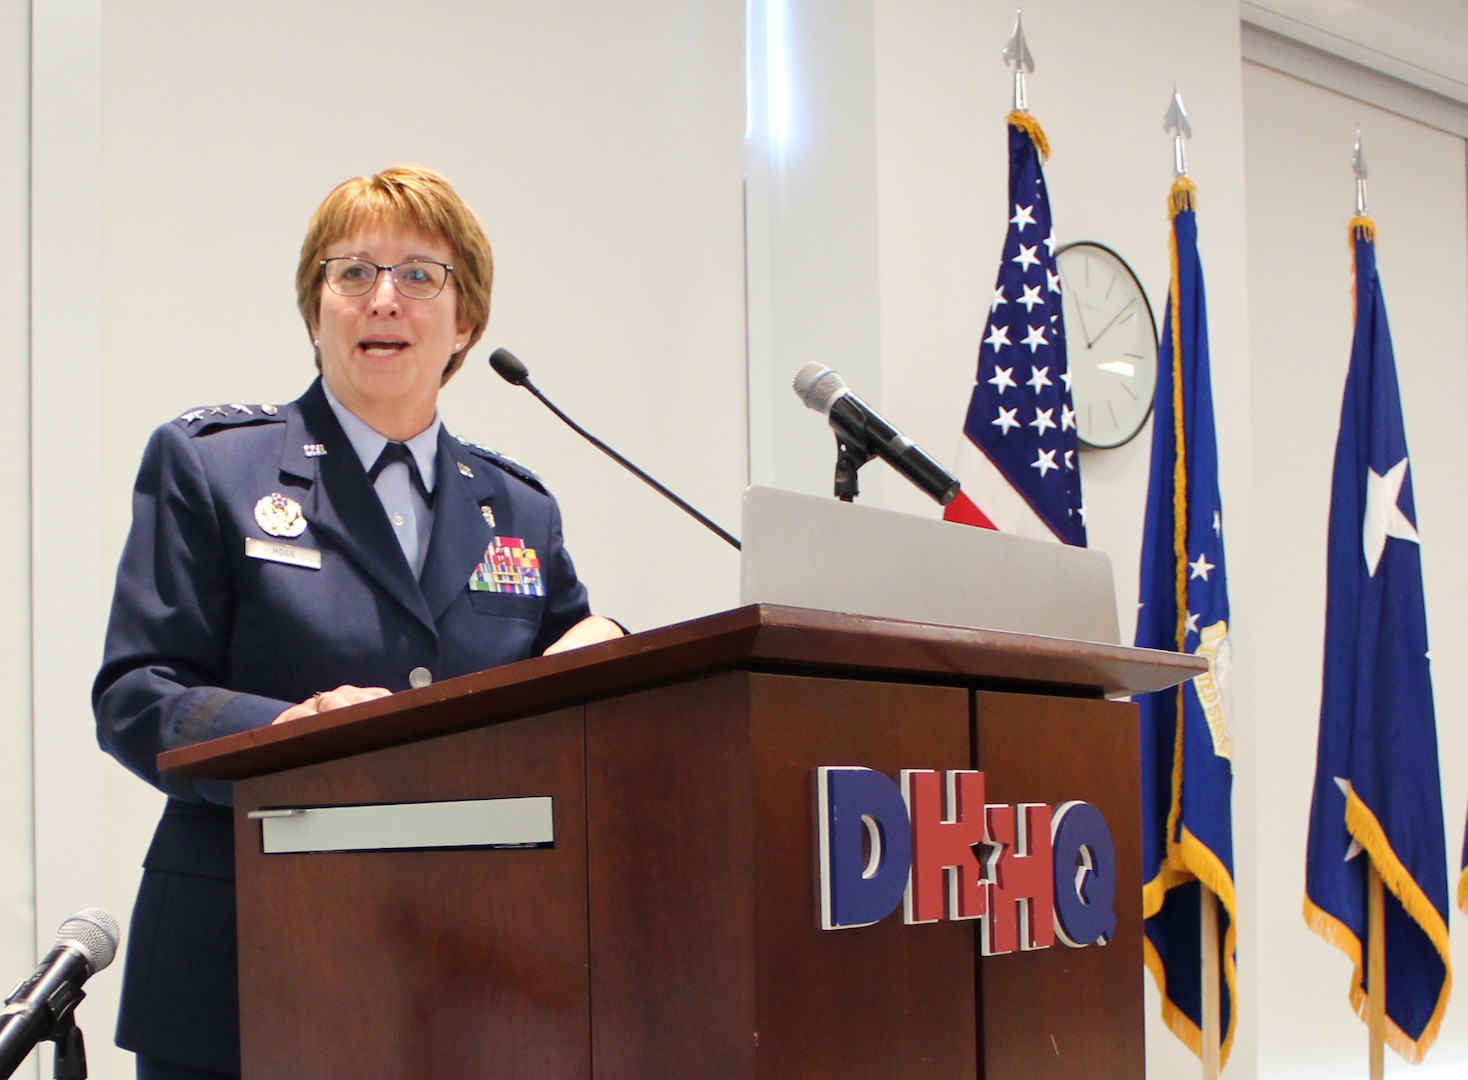 U.S. Air Force Surgeon General, Lt. Gen. Dorothy Hogg, speaks at the official activation of Air Force Medical Readiness Agency, at Defense Health Headquarters, Falls Church, Virginia, June 28, 2019.